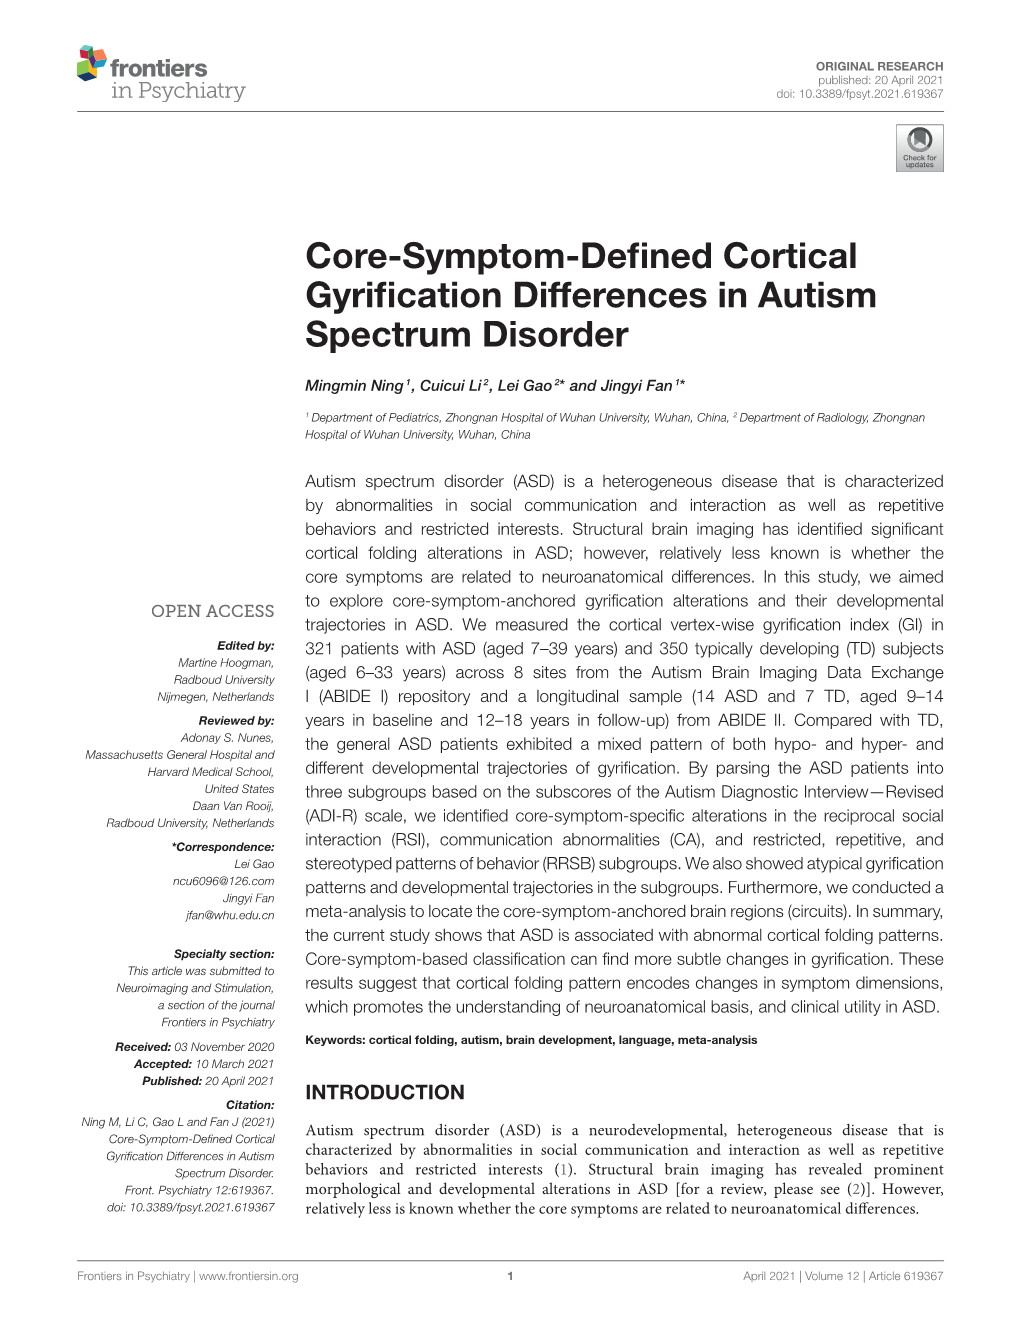 Core-Symptom-Defined Cortical Gyrification Differences in Autism